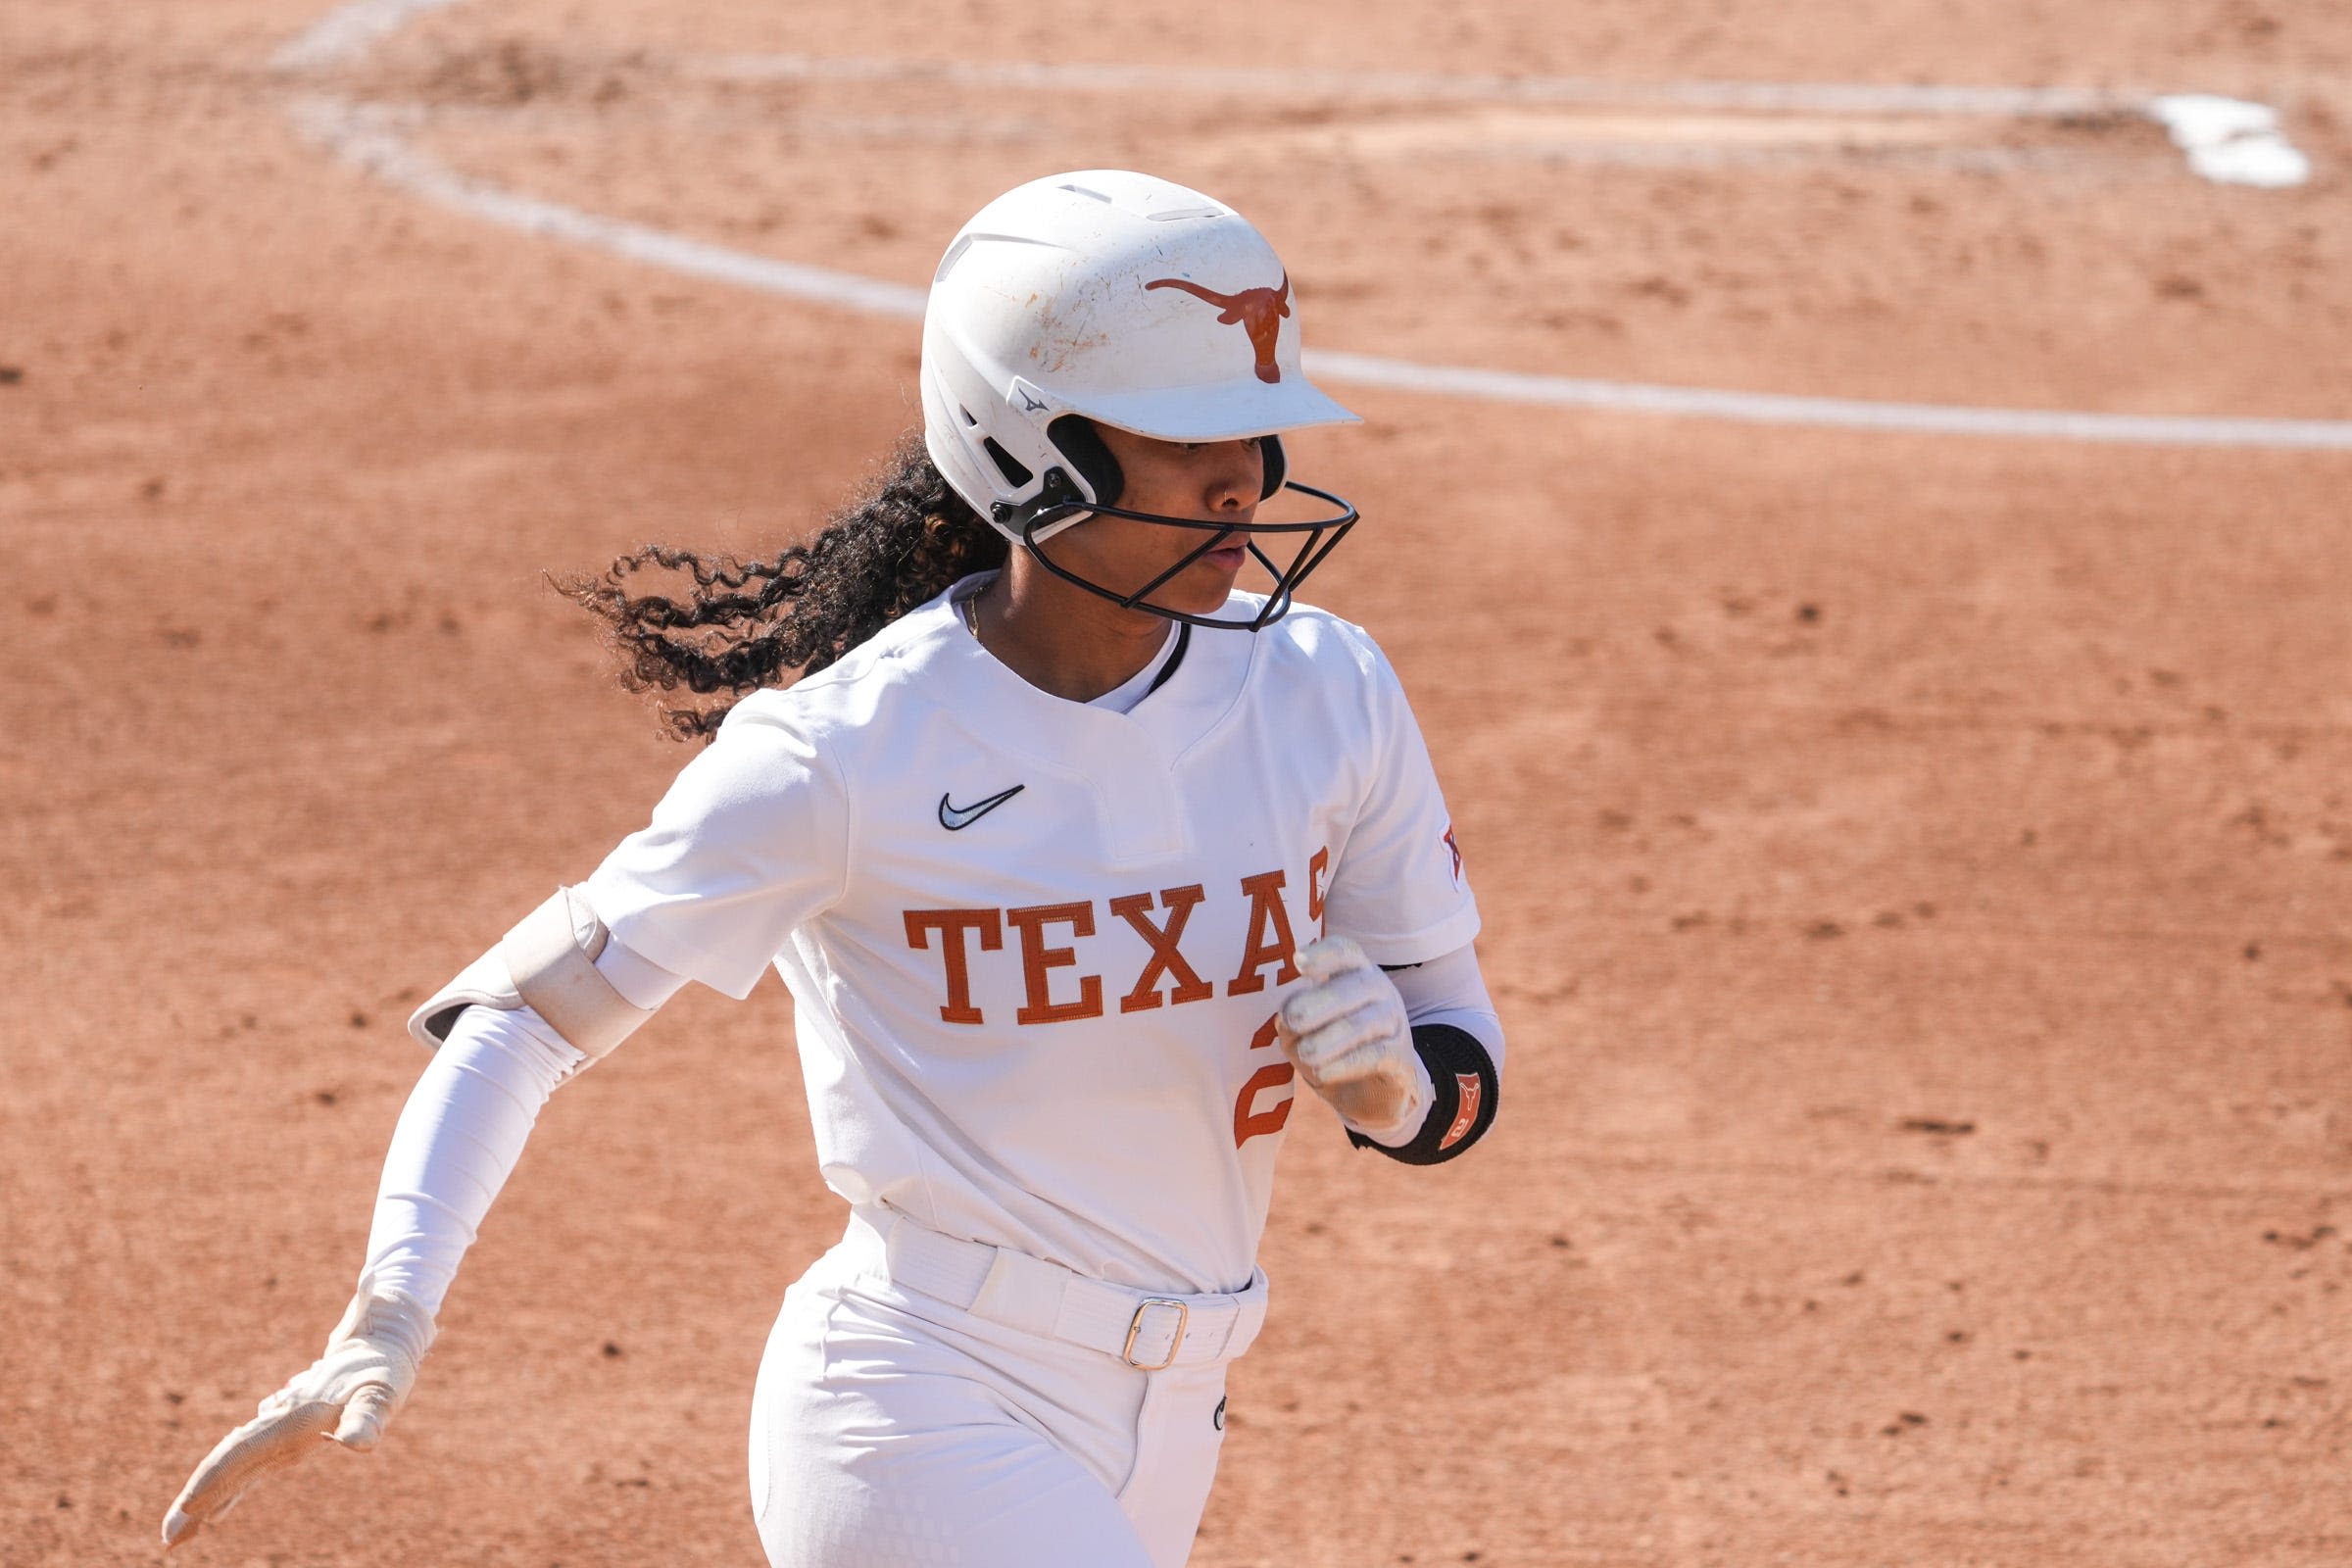 Texas softball team wins extra-inning thriller over Texas A&M, sets up Game 3 Sunday